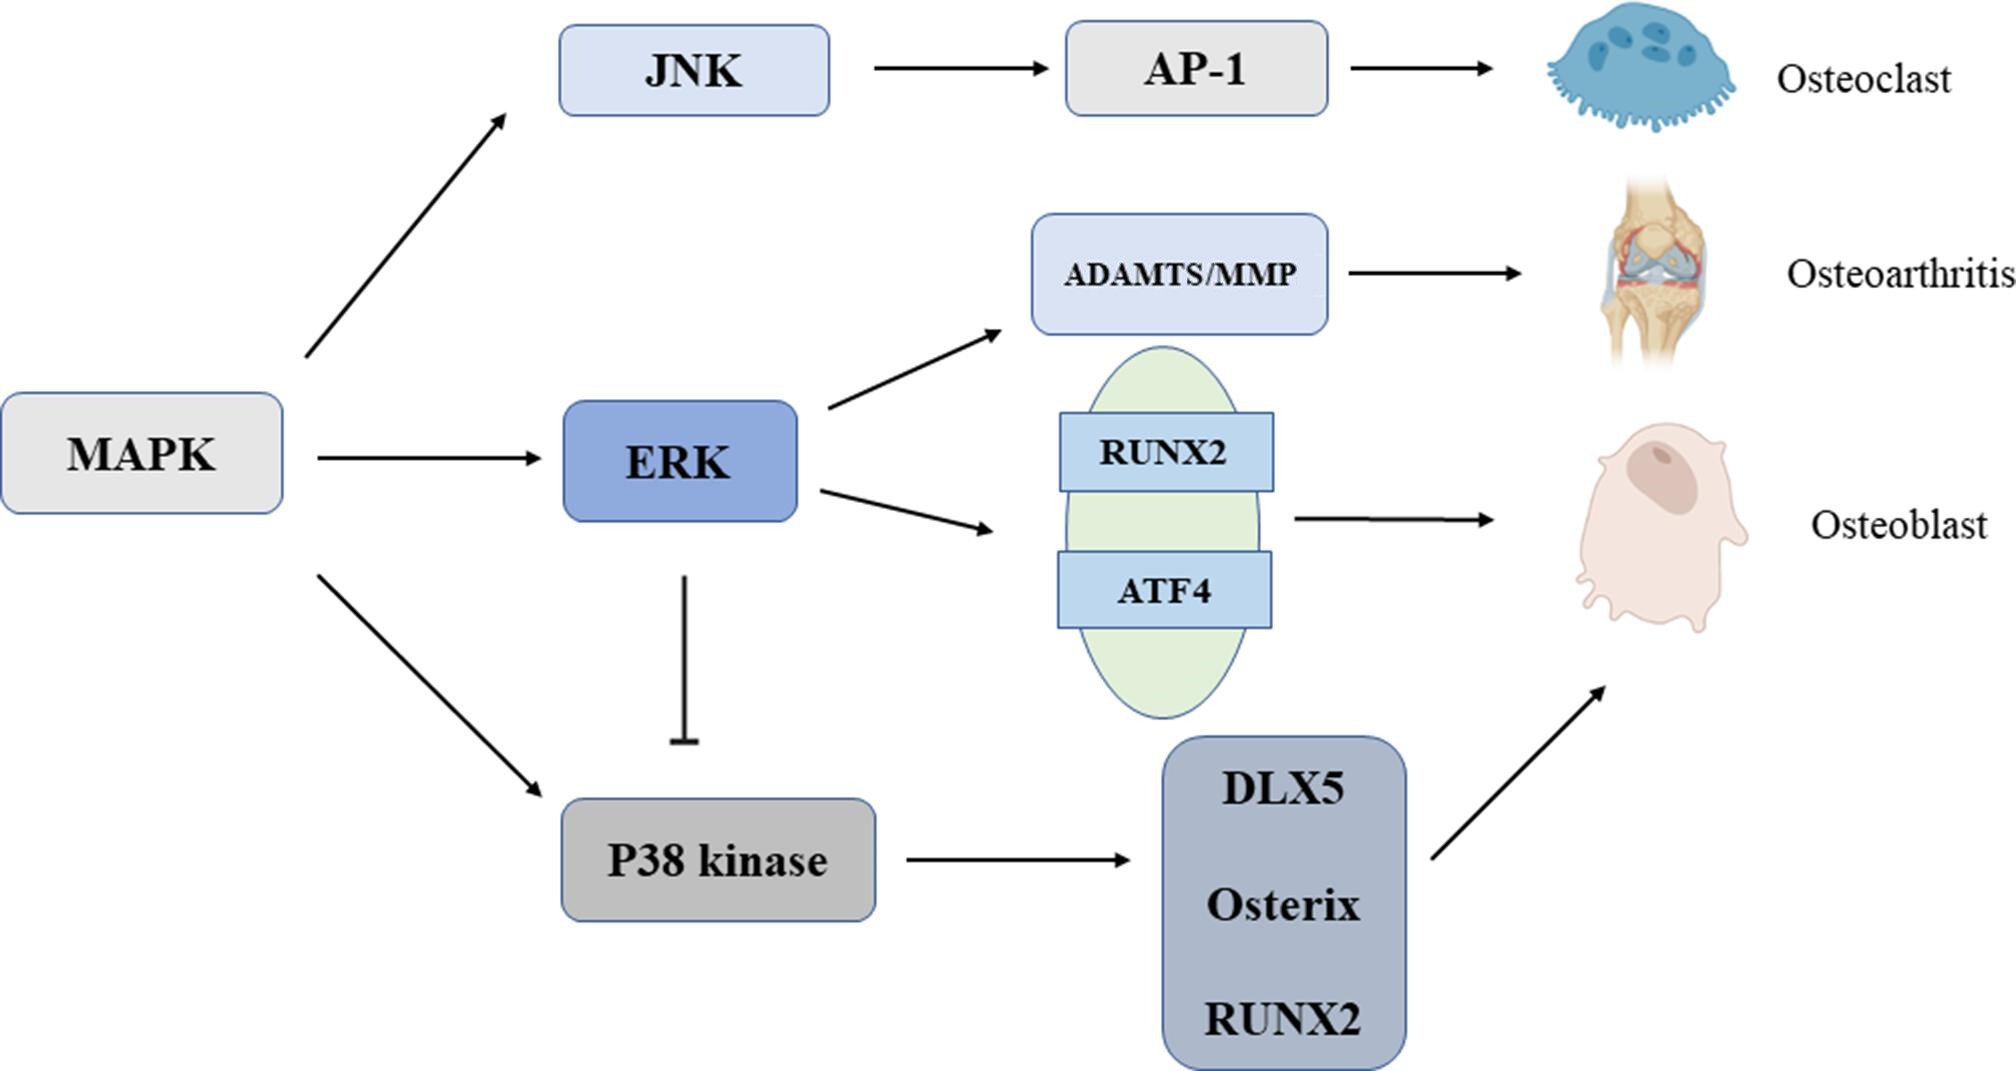 Fig. 4 
            Mitogen-activated protein kinase (MAPK) signal pathway in subchondral bone. The MAPK family consists of three kinases: extracellular signal-regulated kinase (ERK), stress-activated protein kinase/c-Jun N-terminal kinase (JNK), and p38 kinase. ERK signal transduction mediates the early and late differentiation of osteoblasts by phosphorylating key transcription factors (such as runt-related transcription factor 2 (RUNX2)) and activating transcription factor 4 (ATF4). Moreover, p38 signal transduction can also promote osteoblast differentiation through phosphorylation of distal-less homeo box 5 (DLX5), Osterix, and RUNX2. ERK, p38, and JNK all promote osteoclast differentiation by regulating activating protein 1 (AP-1) as a key medium for osteoclast formation. In addition, the upregulation of a disintegrin-like and metalloproteinase with thrombospondin (ADAMTS) and matrix metalloproteinases (MMPs) mediated by the activation of ERK signalling pathway plays an important role in the early development of osteoarthritis.
          